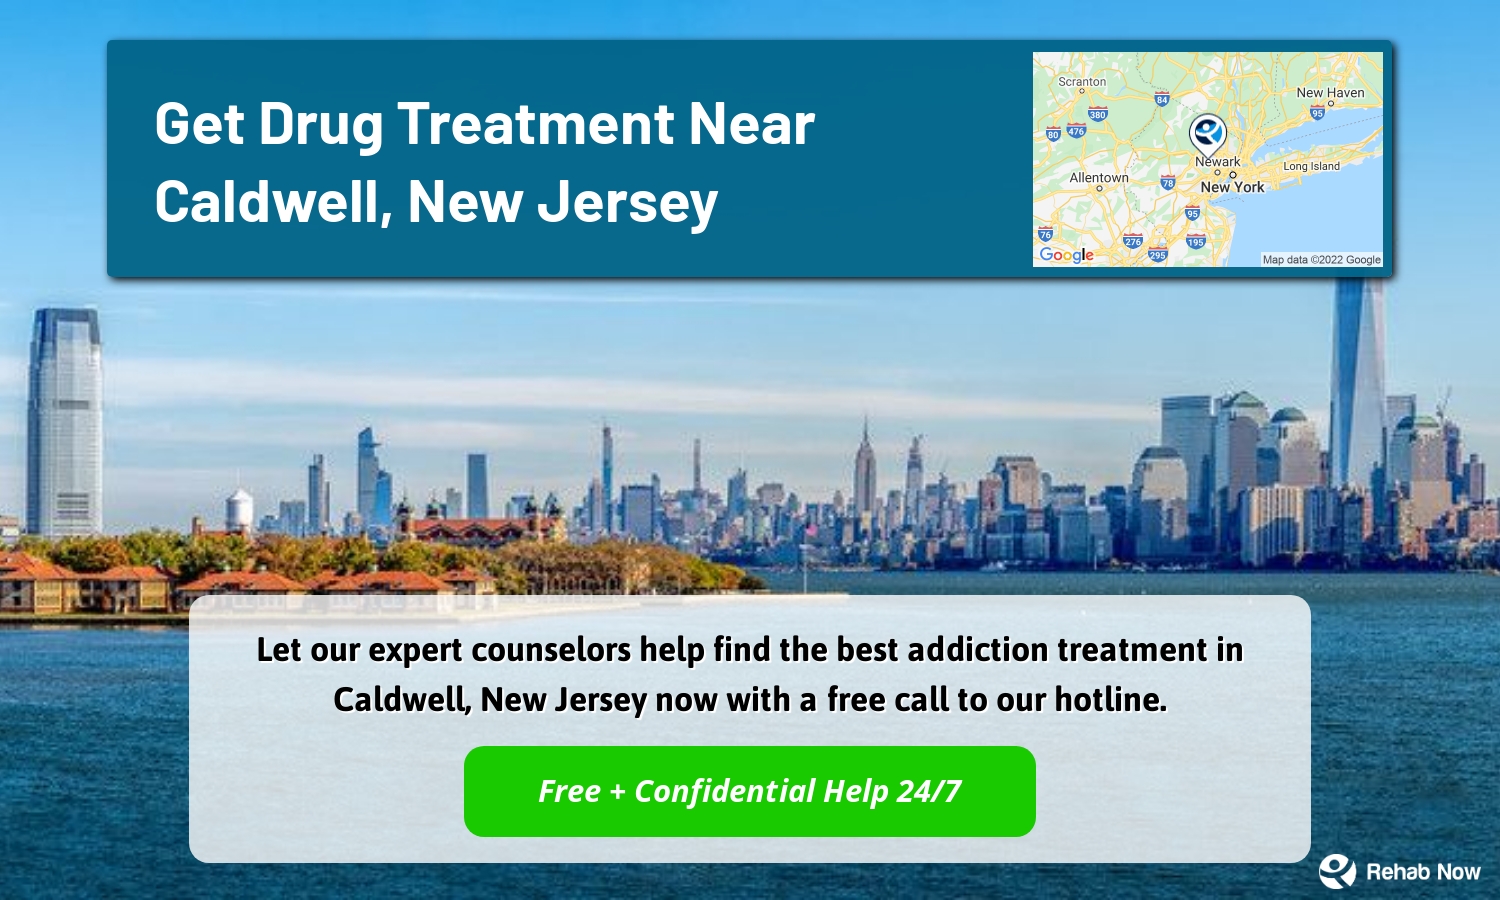 Let our expert counselors help find the best addiction treatment in Caldwell, New Jersey now with a free call to our hotline.